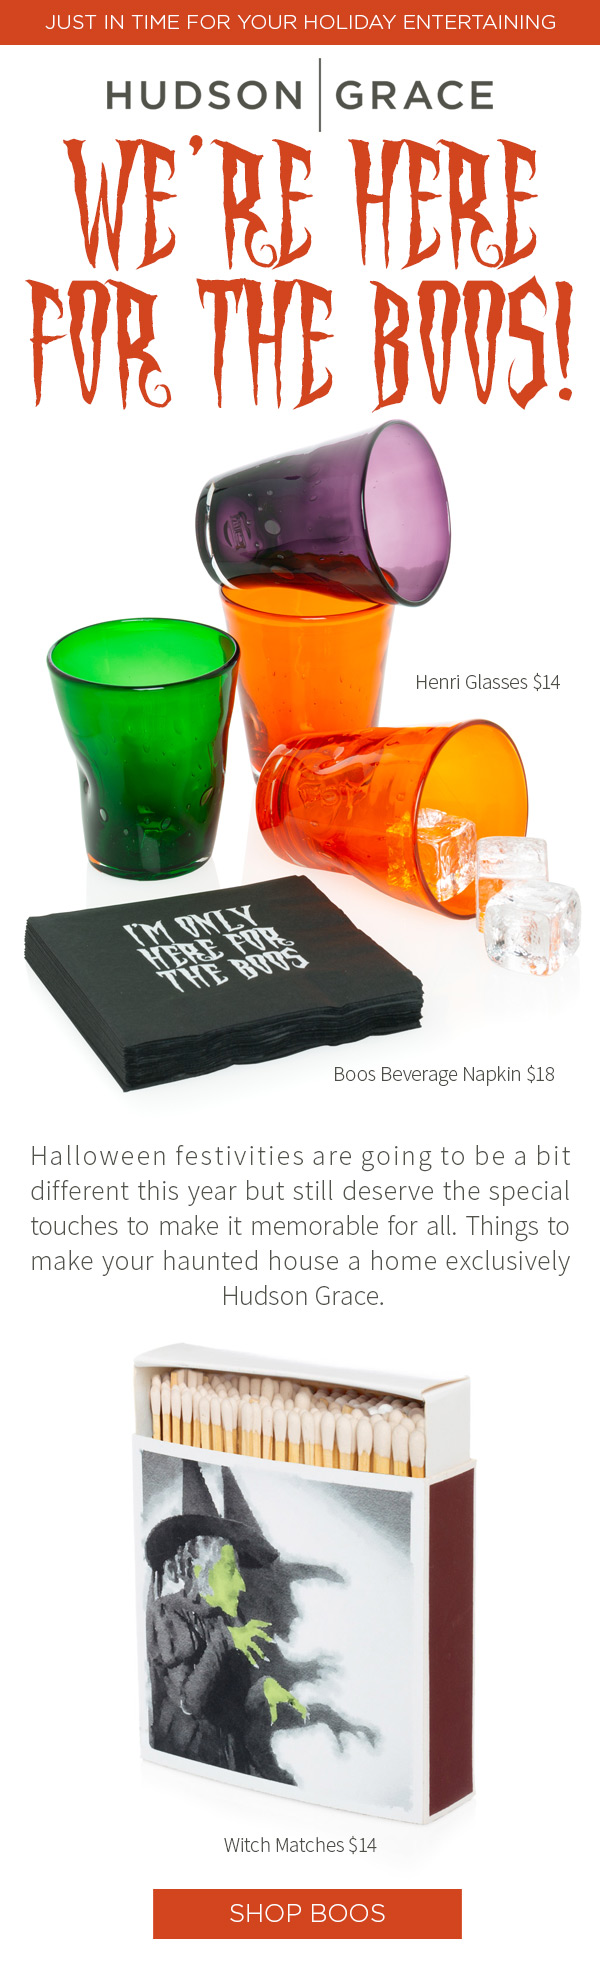 We're here for the Boos! Halloween festivities are going to be a bit different this year but still deserve the special touches to make it memorable for all. Things to make your haunted house a home exclusively Hudson Grace. Henri Glasses $14 . Boos Beverage Napkin $18 .?Witch Matches $14.